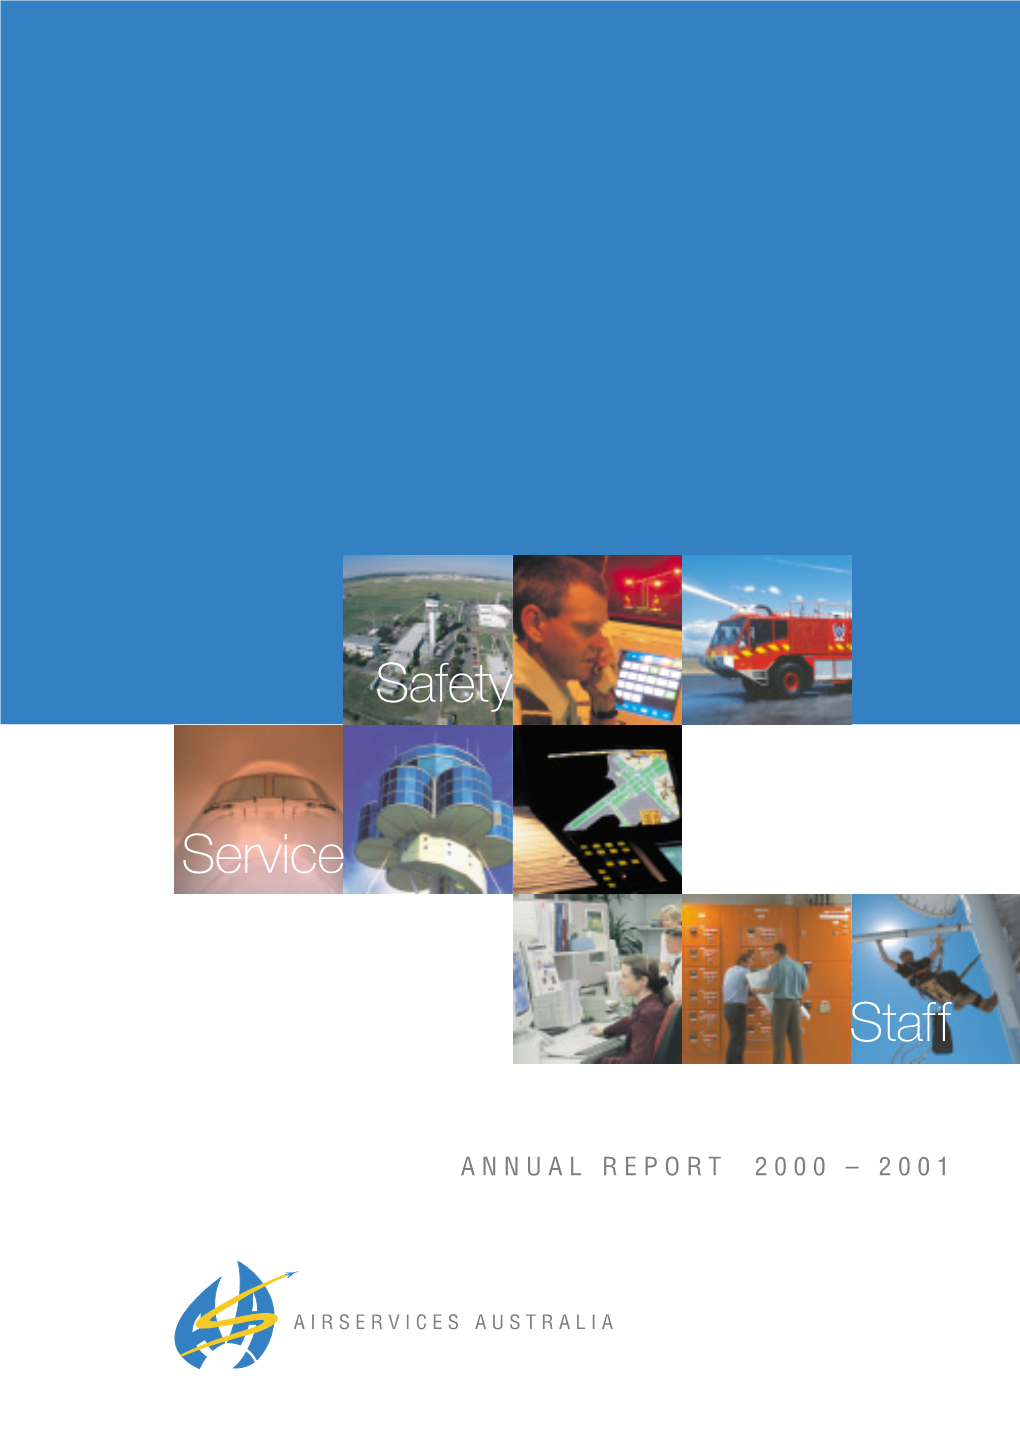 Airservices Australia Annual Report 2000 - 2001 Has Been Prepared in Accordance with Those Requirements and the Finance Minister’S Orders